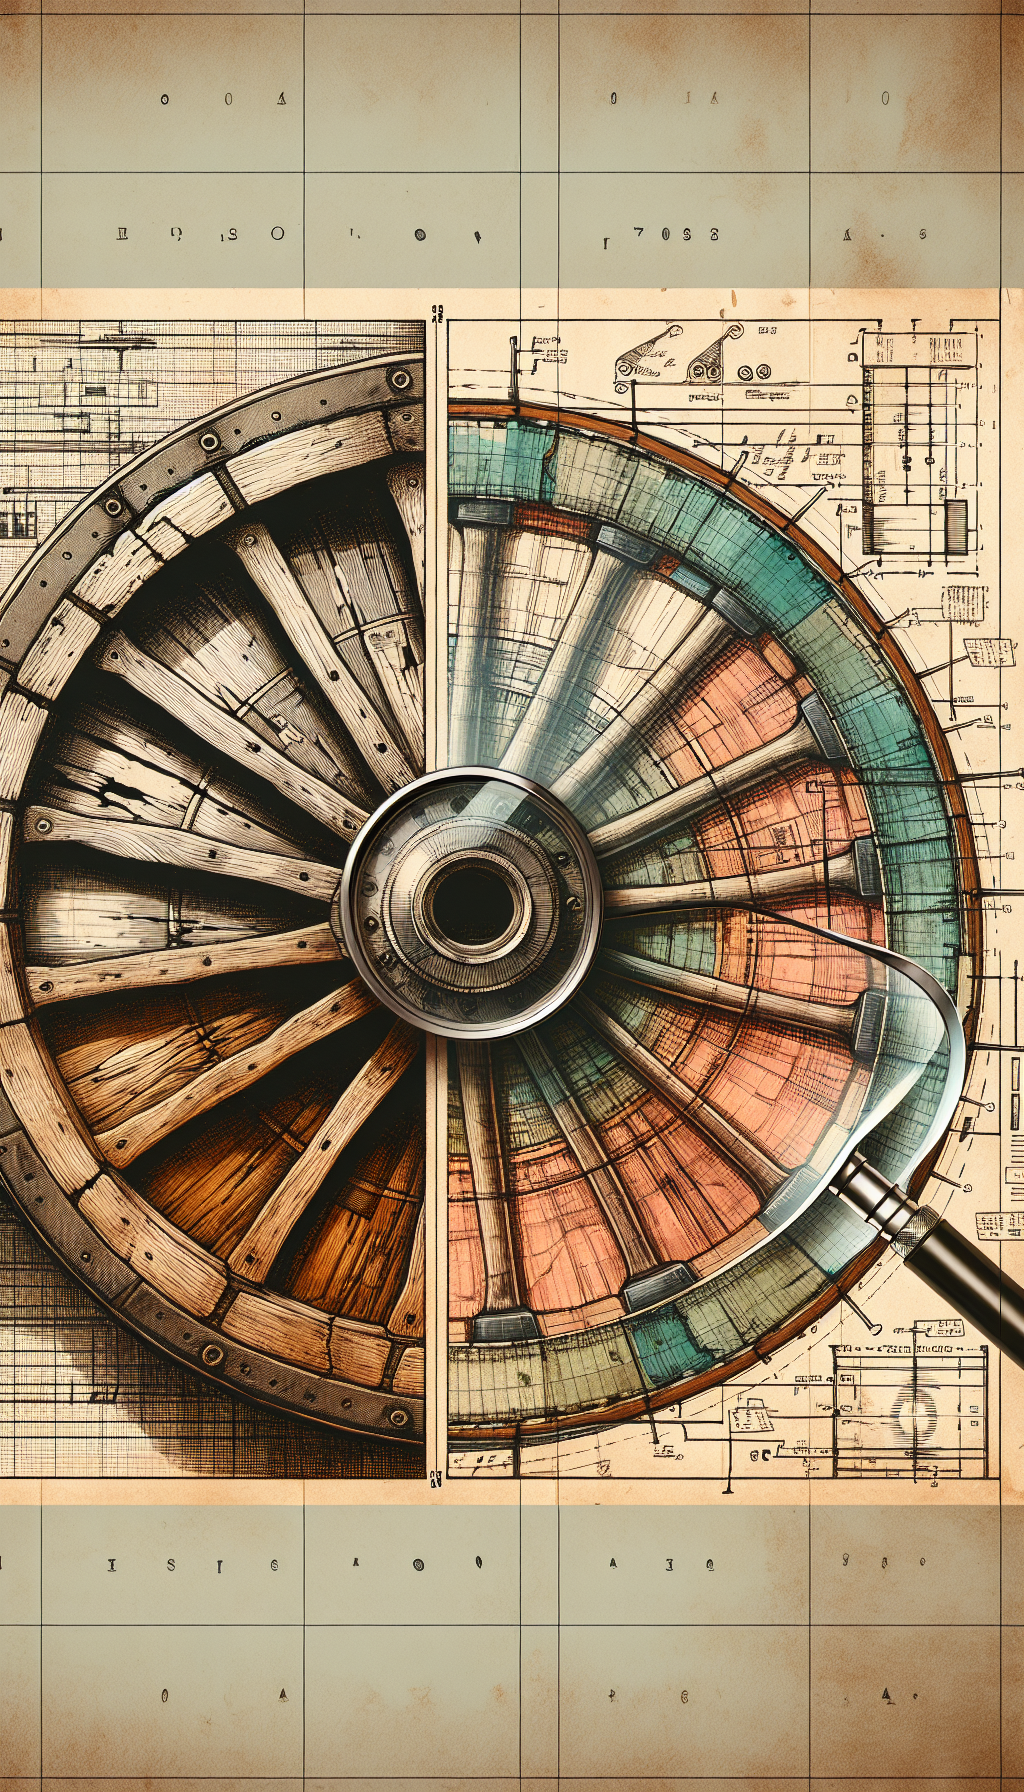 An intricate cross-section of a vintage wagon wheel—half in detailed line art, half in watercolor. The line art meticulously outlines the wood grain, metal rim, and hub structure, while the watercolor side, with a magnifying glass overlay, highlights patina and wear marks. A faded blueprint background with annotations intimates identification points and the craftsmanship timeline.